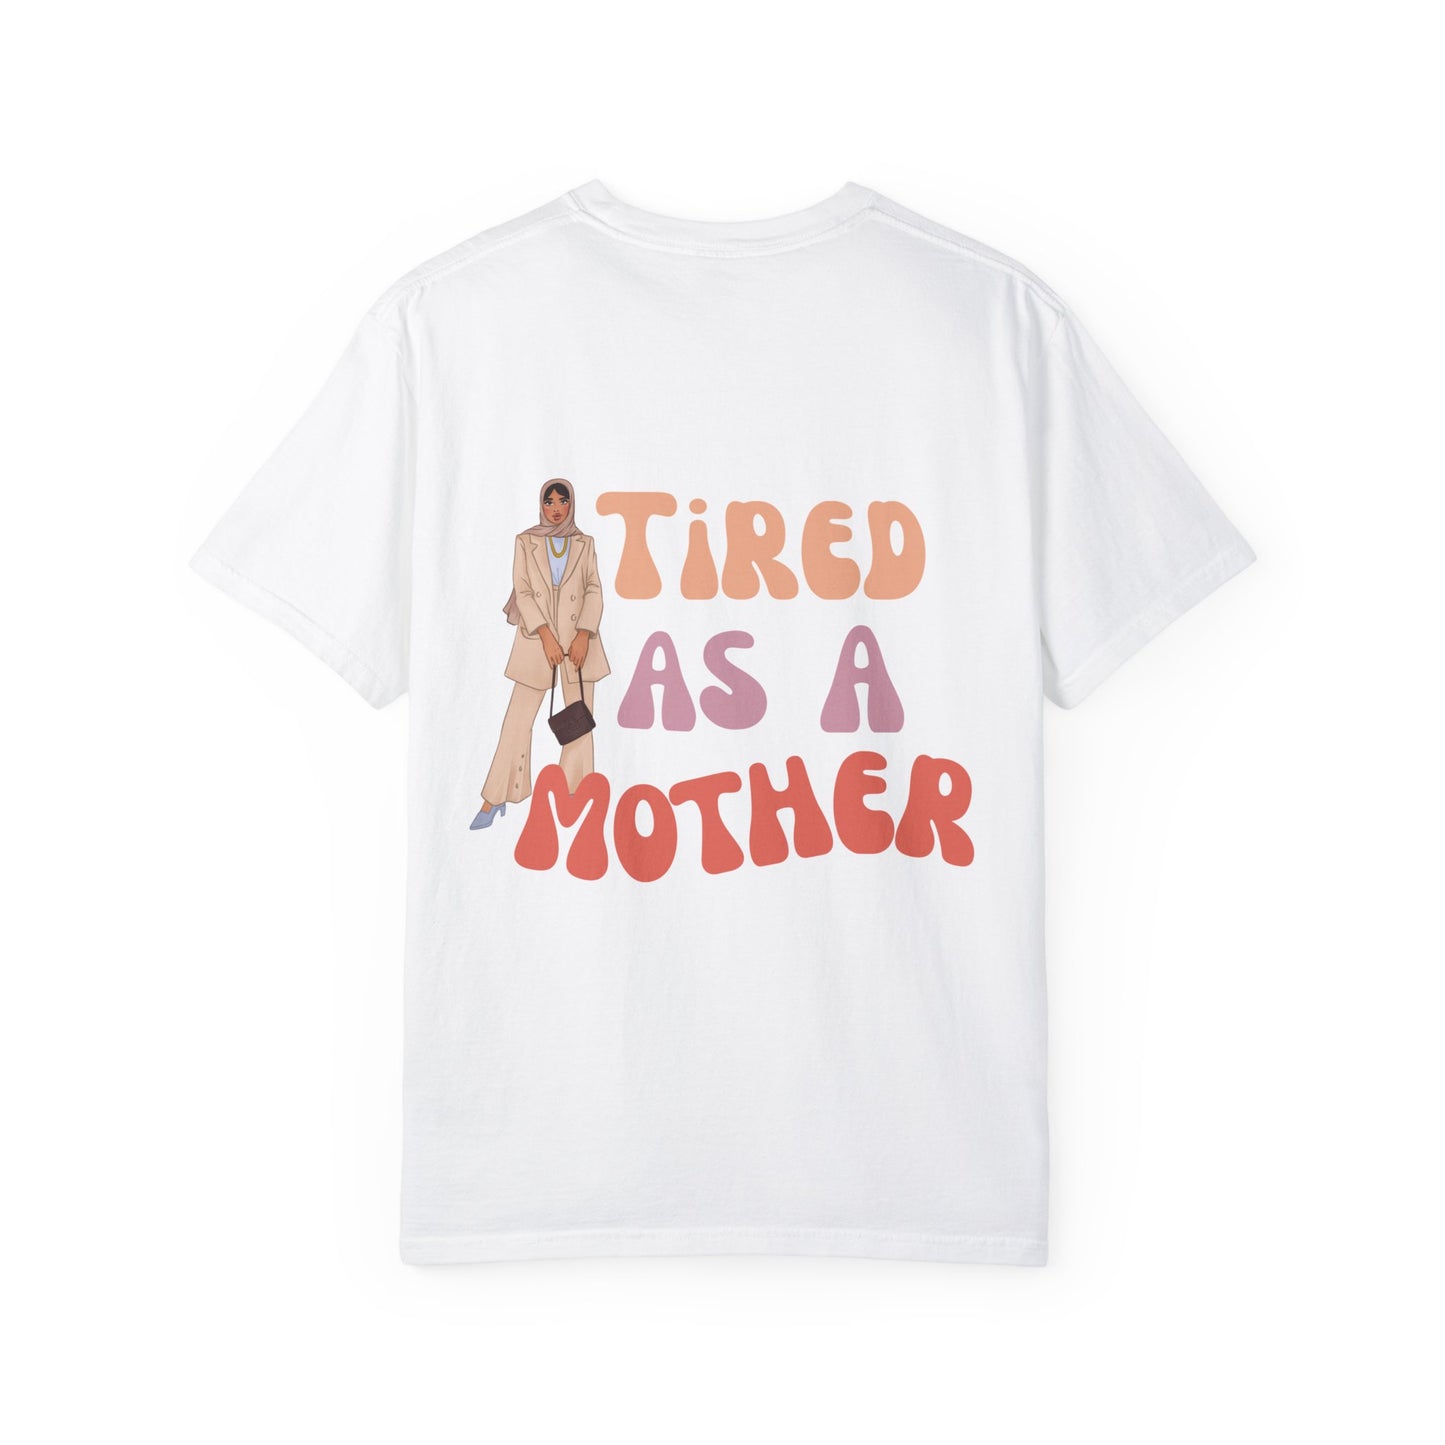 Tired mom T-shirt